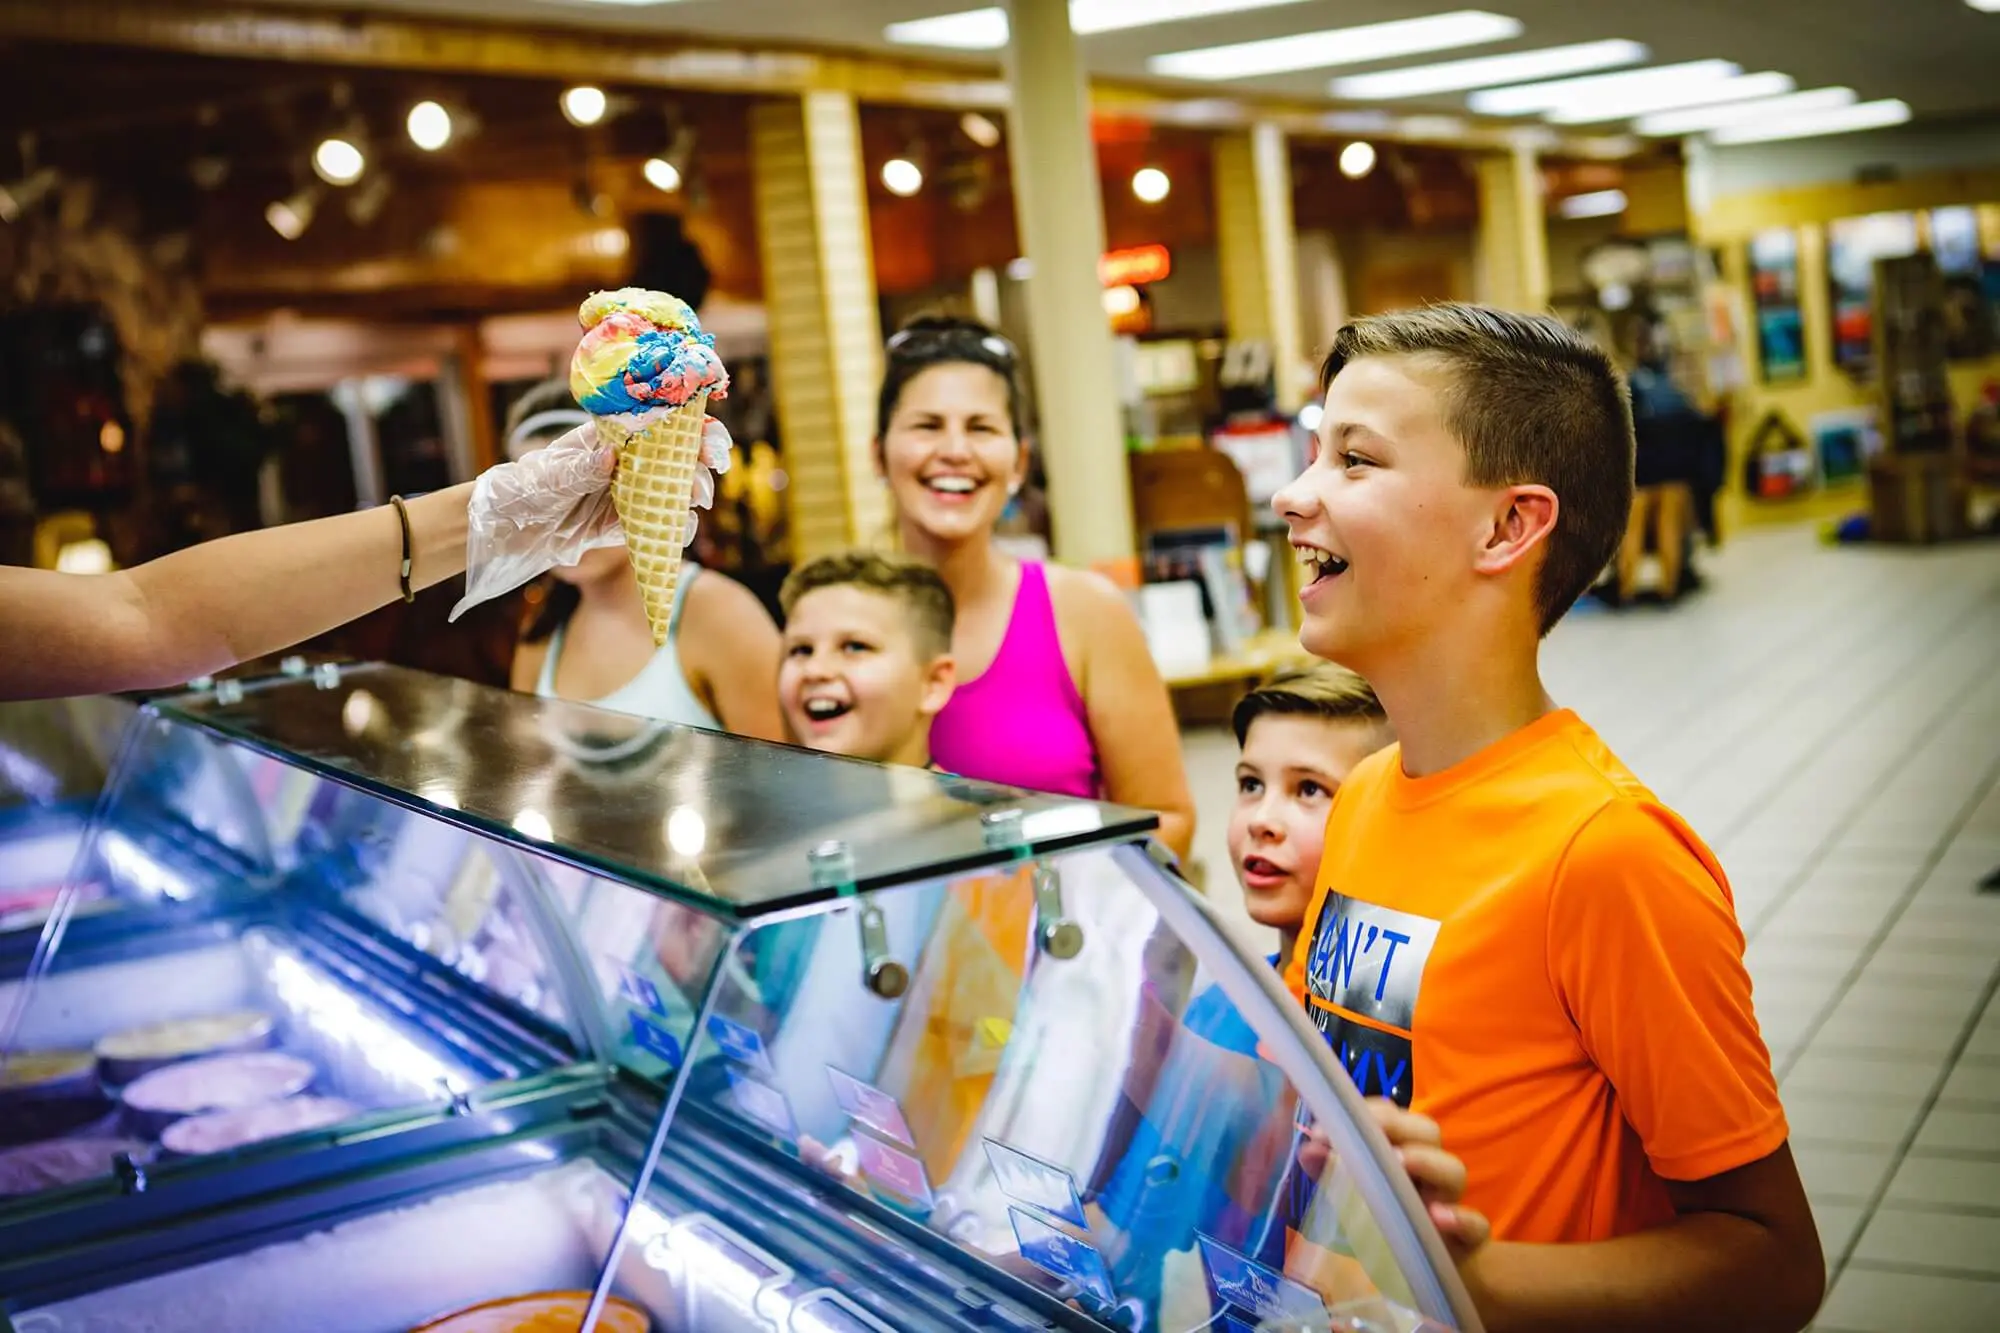 Hungry children and parent being served an ice cream cone at the Meramec Caverns candy shop